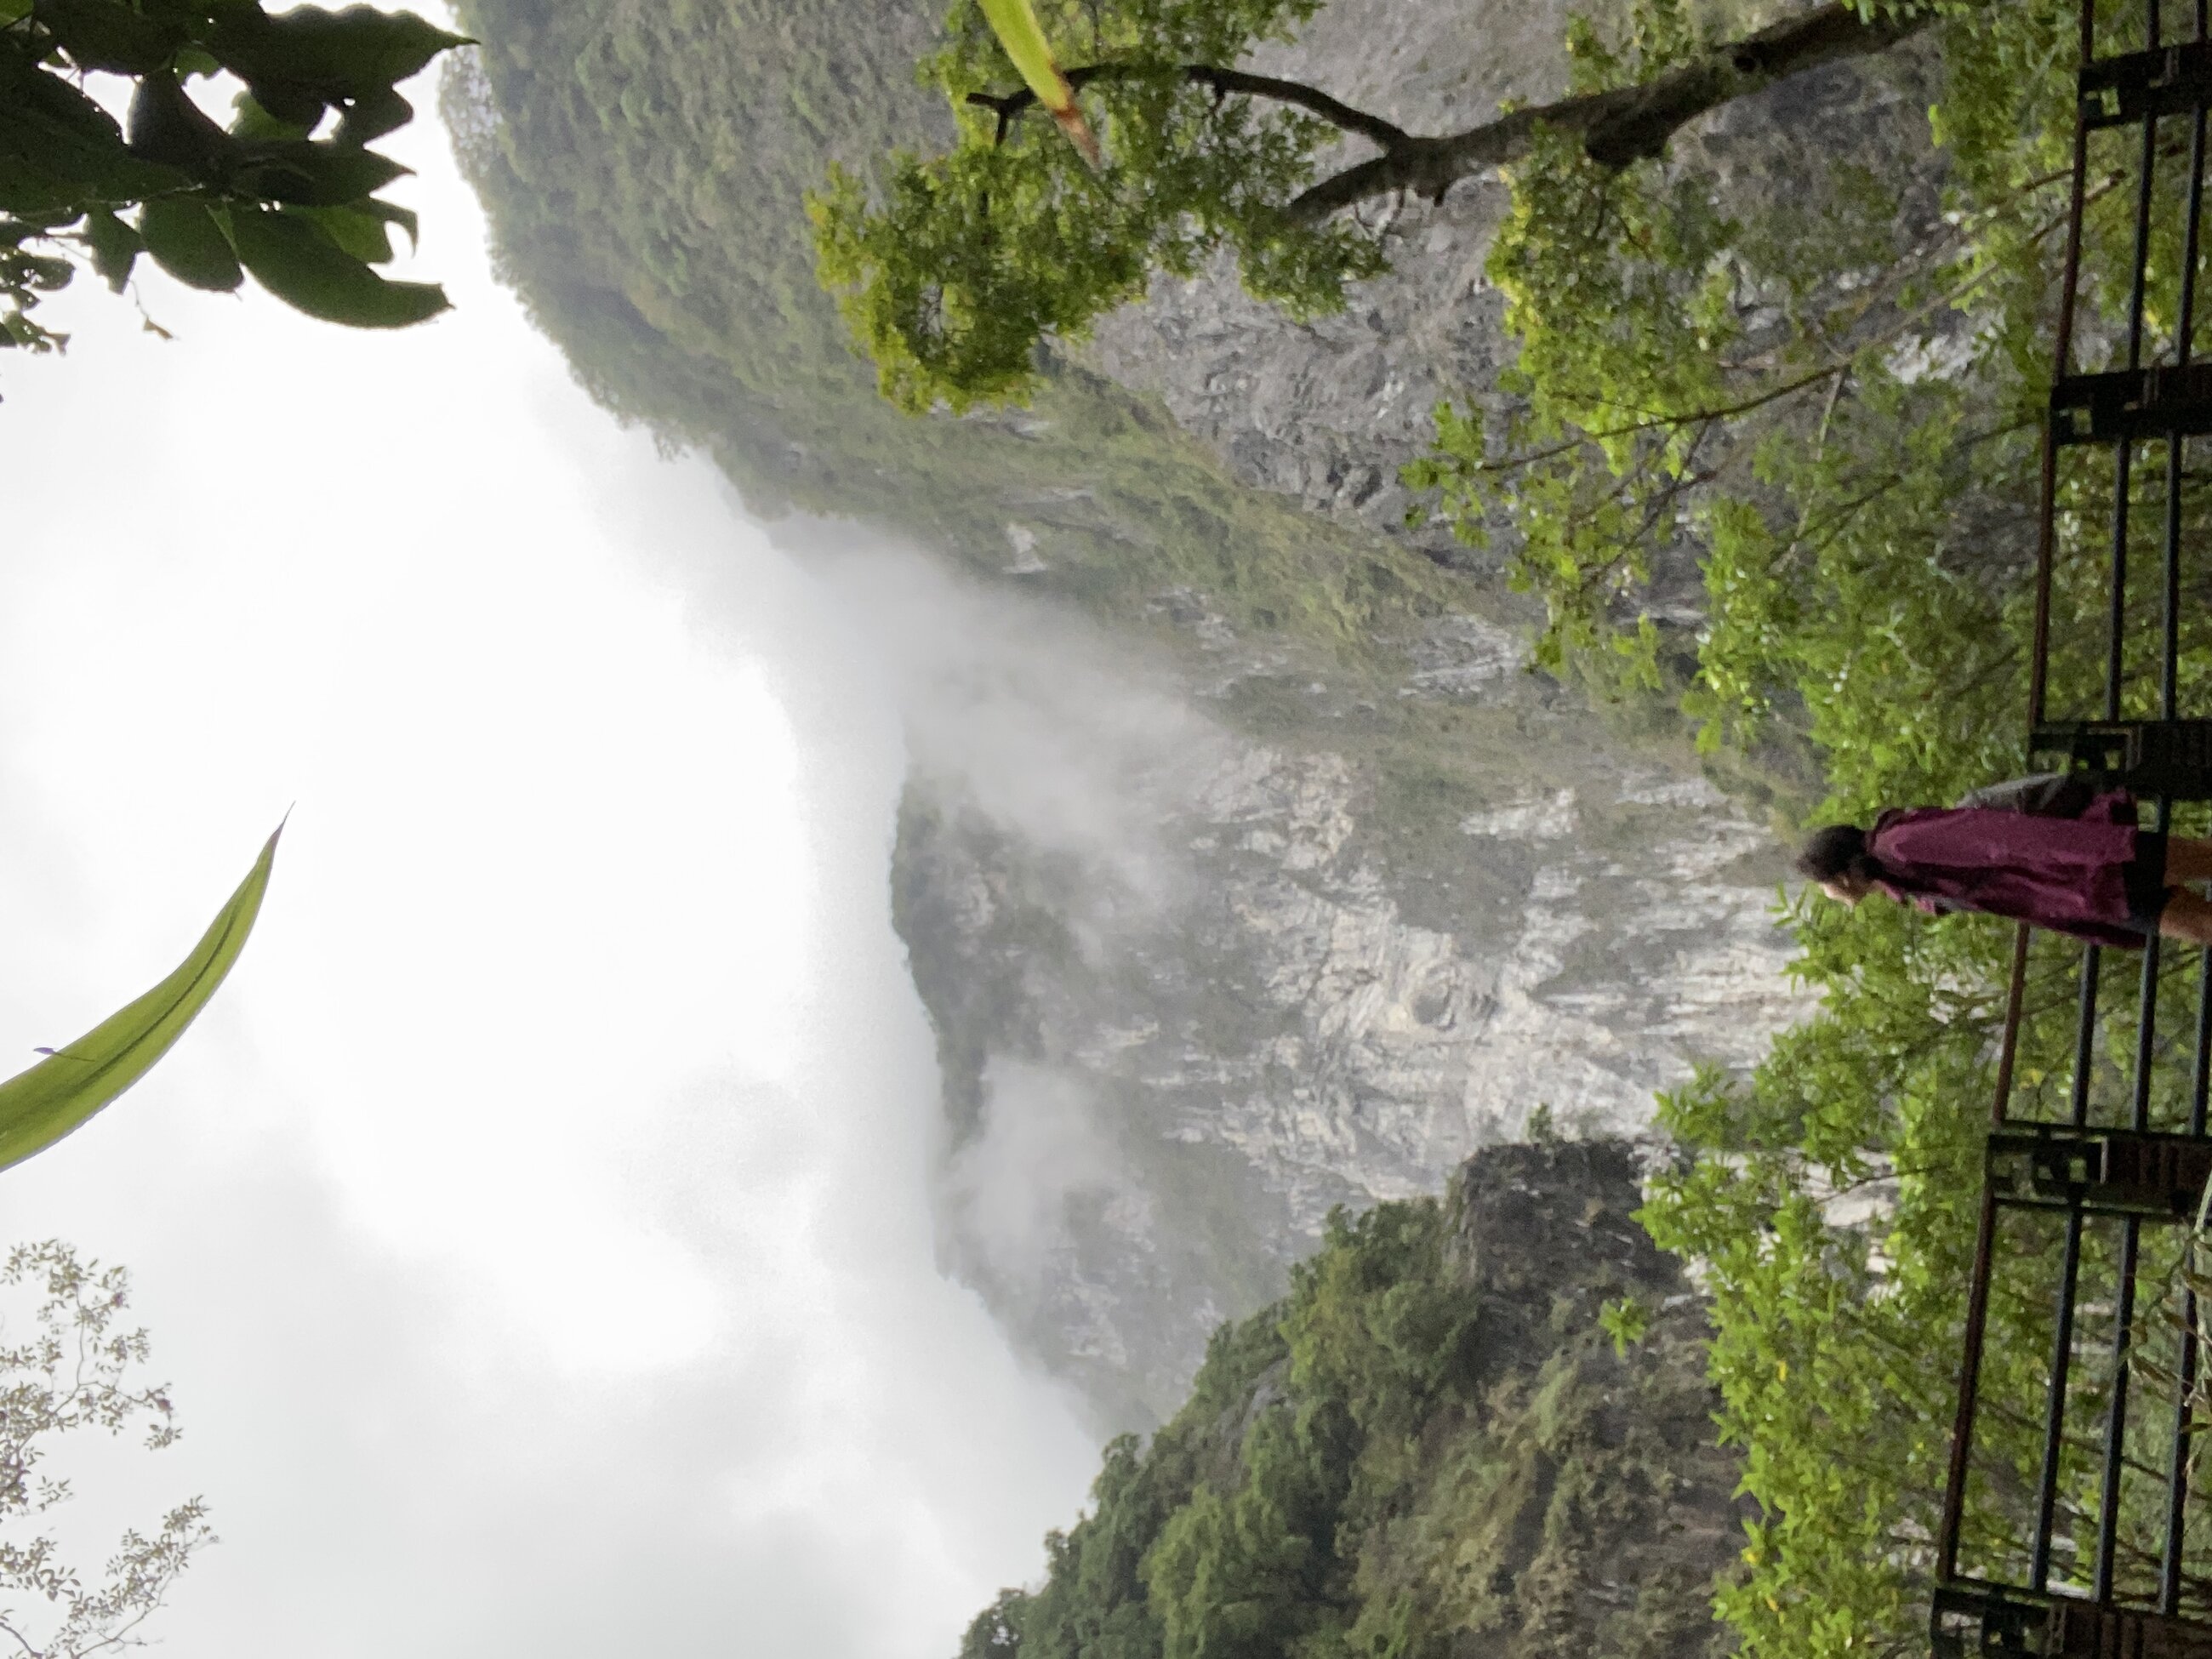 Solo trip Adventure to Taroko Gorge~ Life changing experience, 100% recommended.  要小心喔！